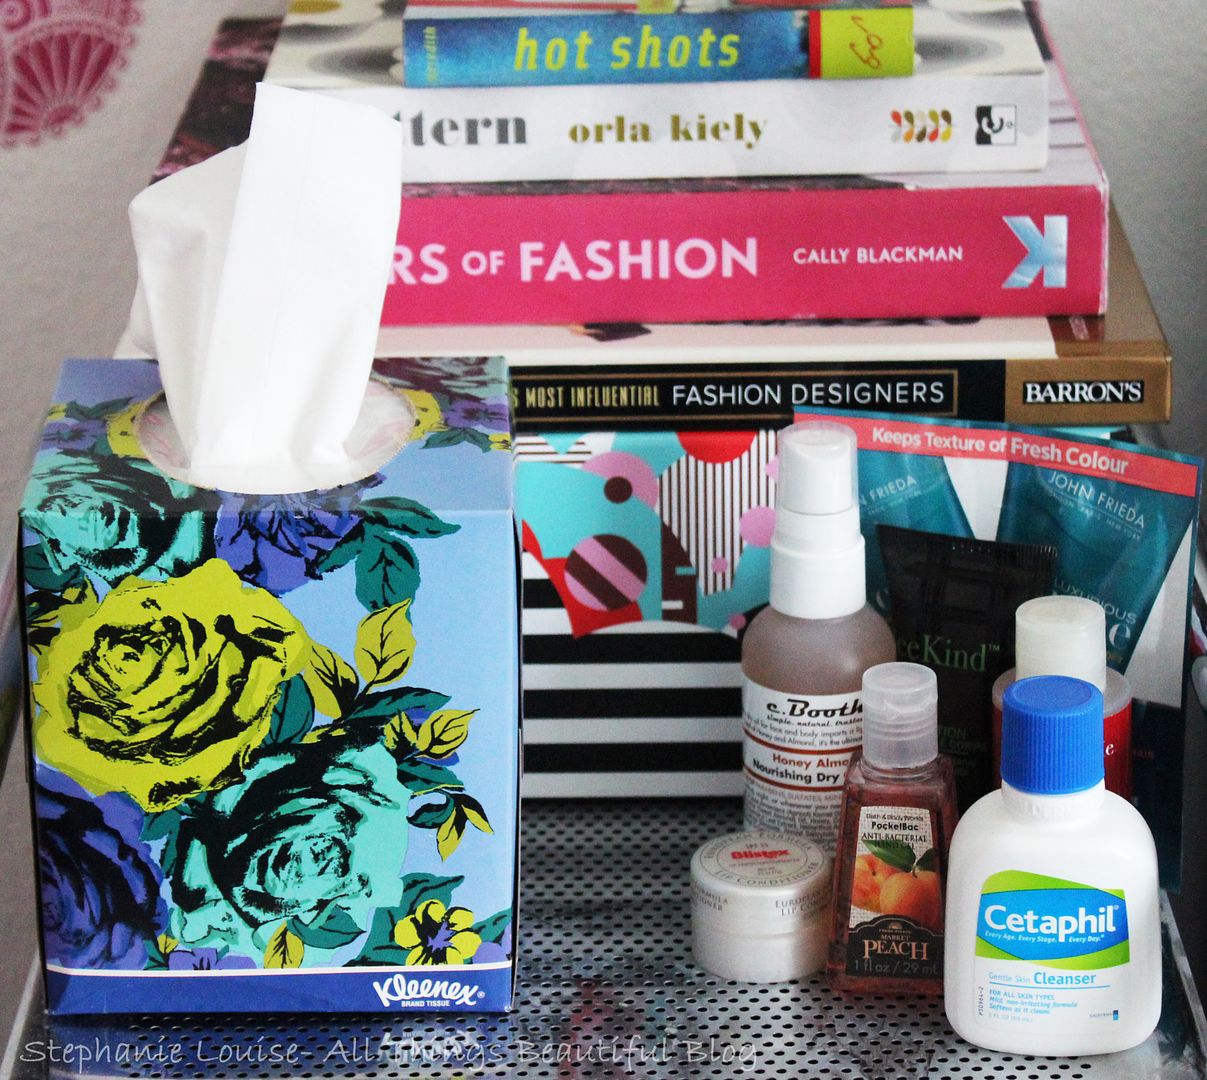 Kleenex Make Your Guests Feel Welcome with Isaac Mizrahi Design Review